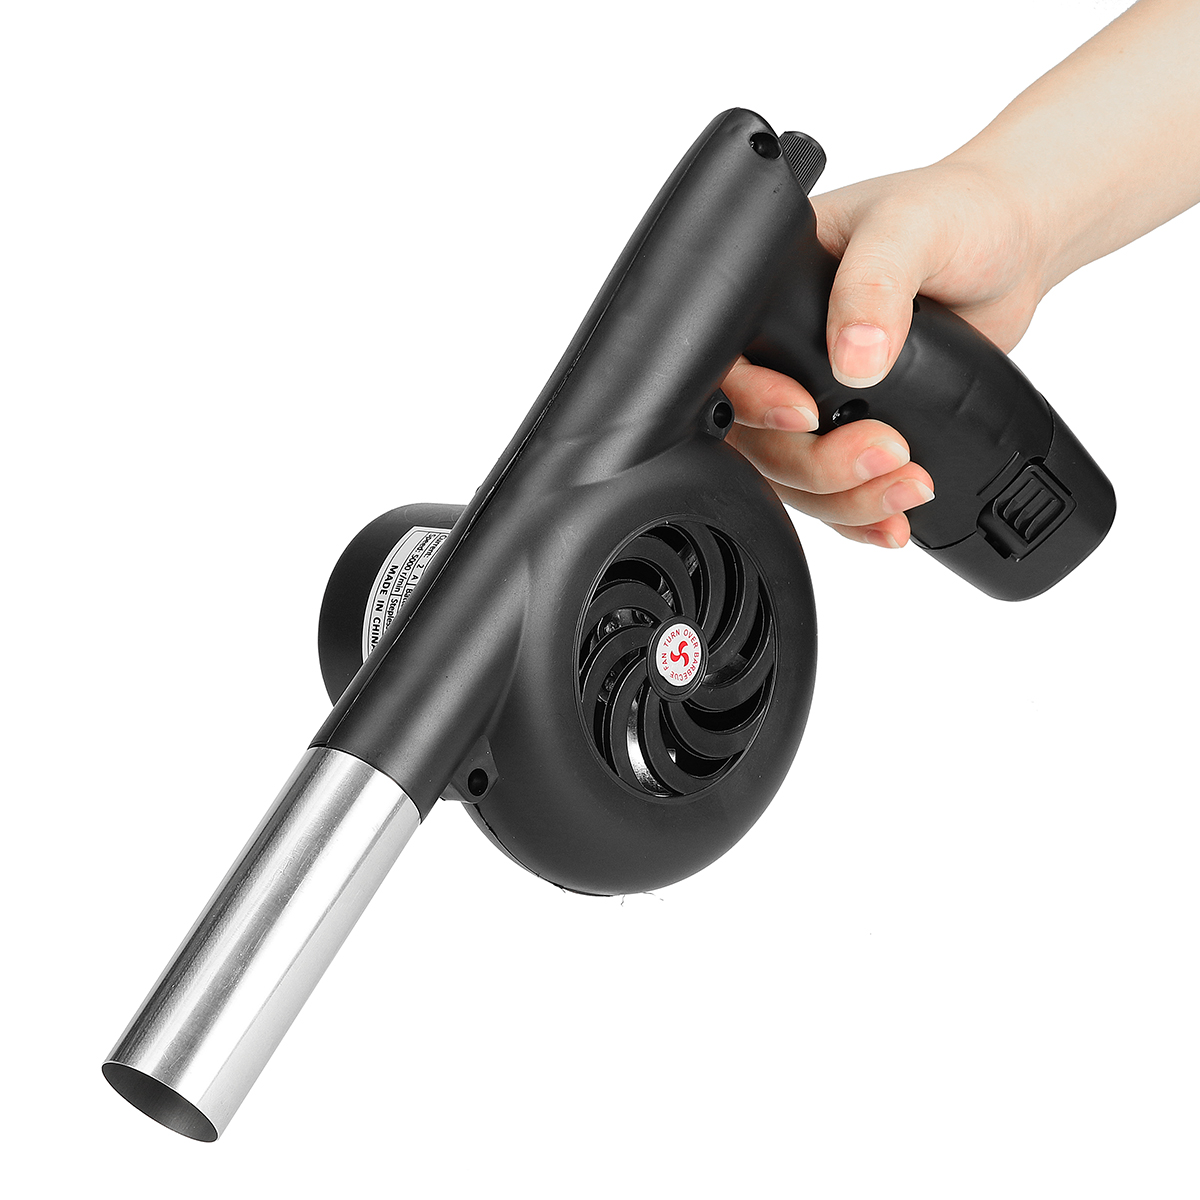 12V-20W-Cordless-Electric-Air-Blower-Handheld--Rechargeable-Leaf-Blower-Dust-Collector-for-Outdoor-B-1918610-10